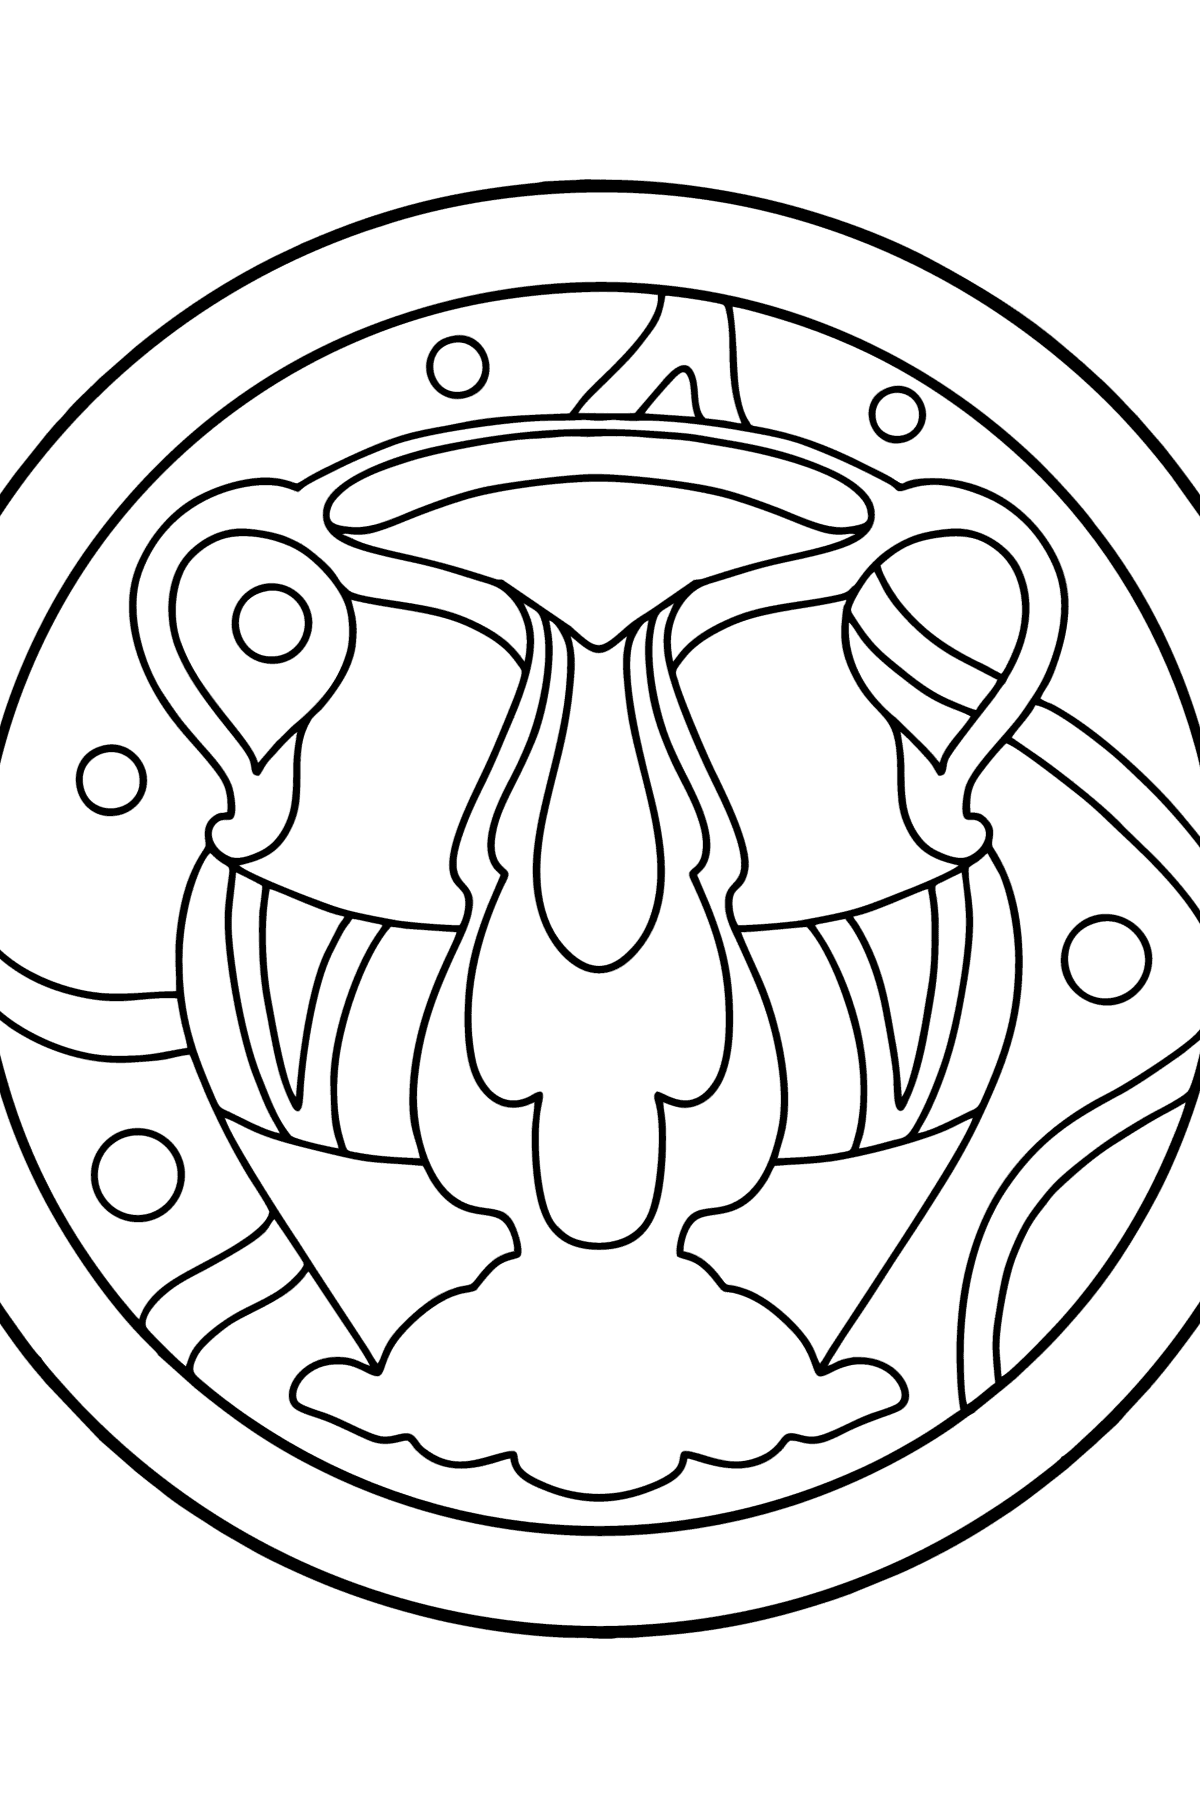 Coloring page for kids - zodiac sign Aquarius - Coloring Pages for Kids